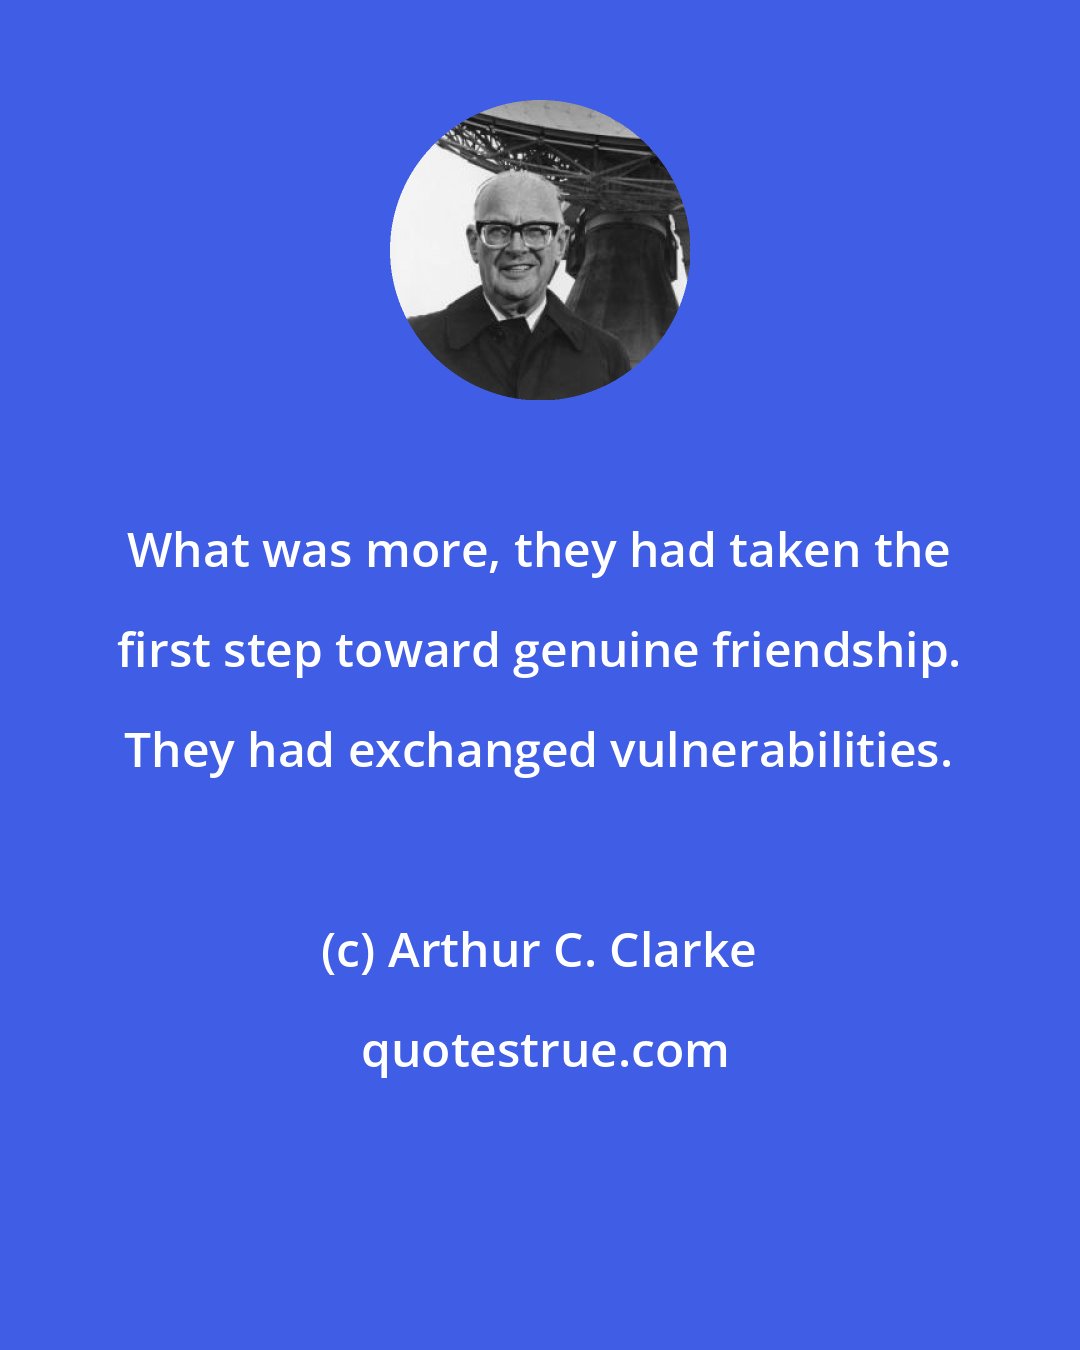 Arthur C. Clarke: What was more, they had taken the first step toward genuine friendship. They had exchanged vulnerabilities.